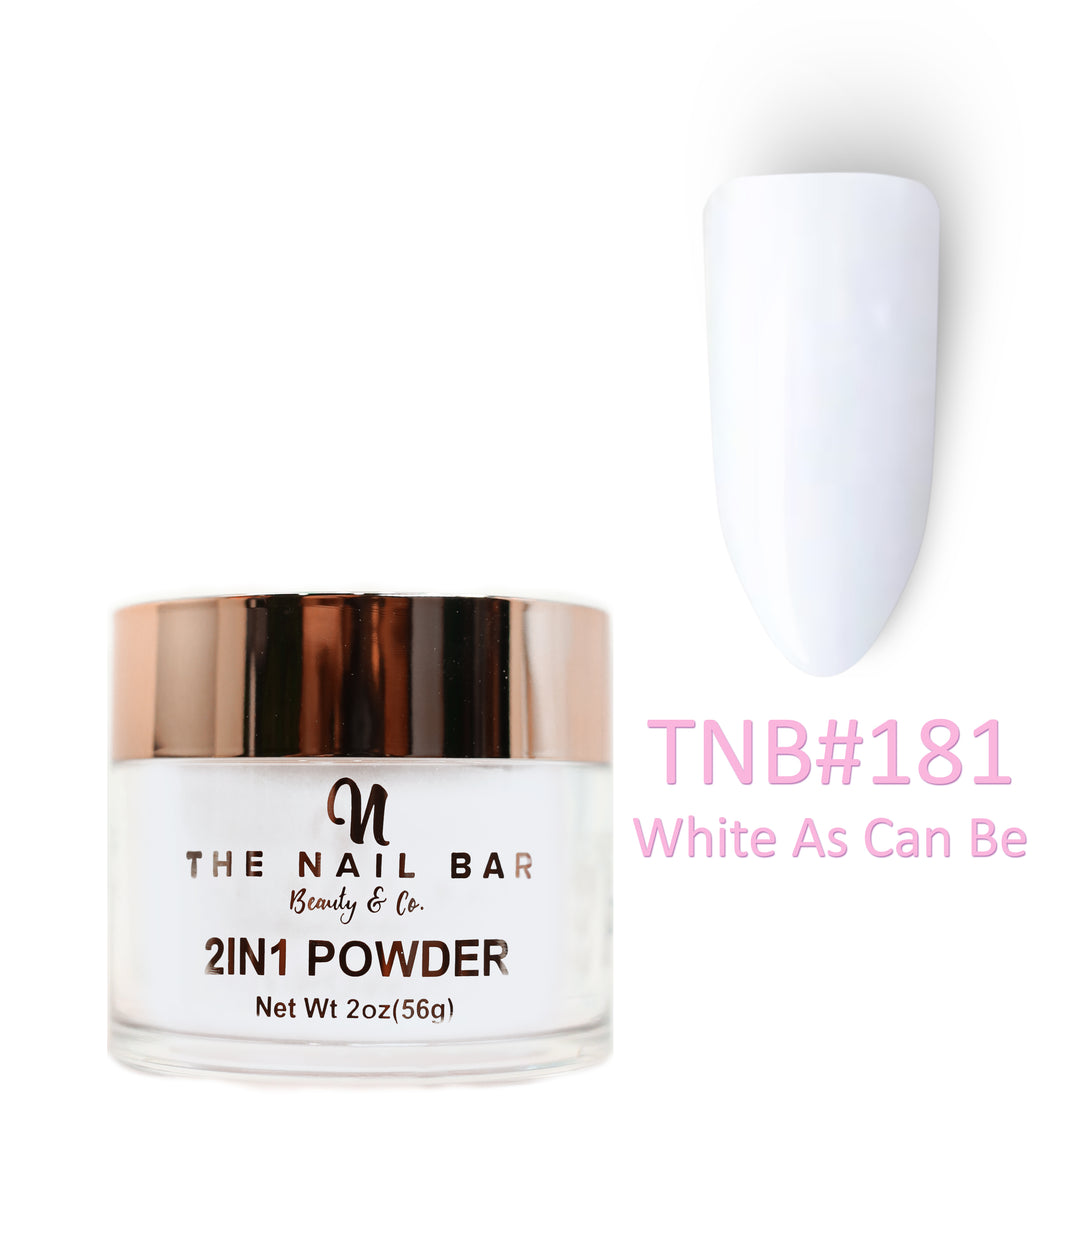 2-In-1 Dipping/Acrylic colour powder (2oz) - White As Can Be